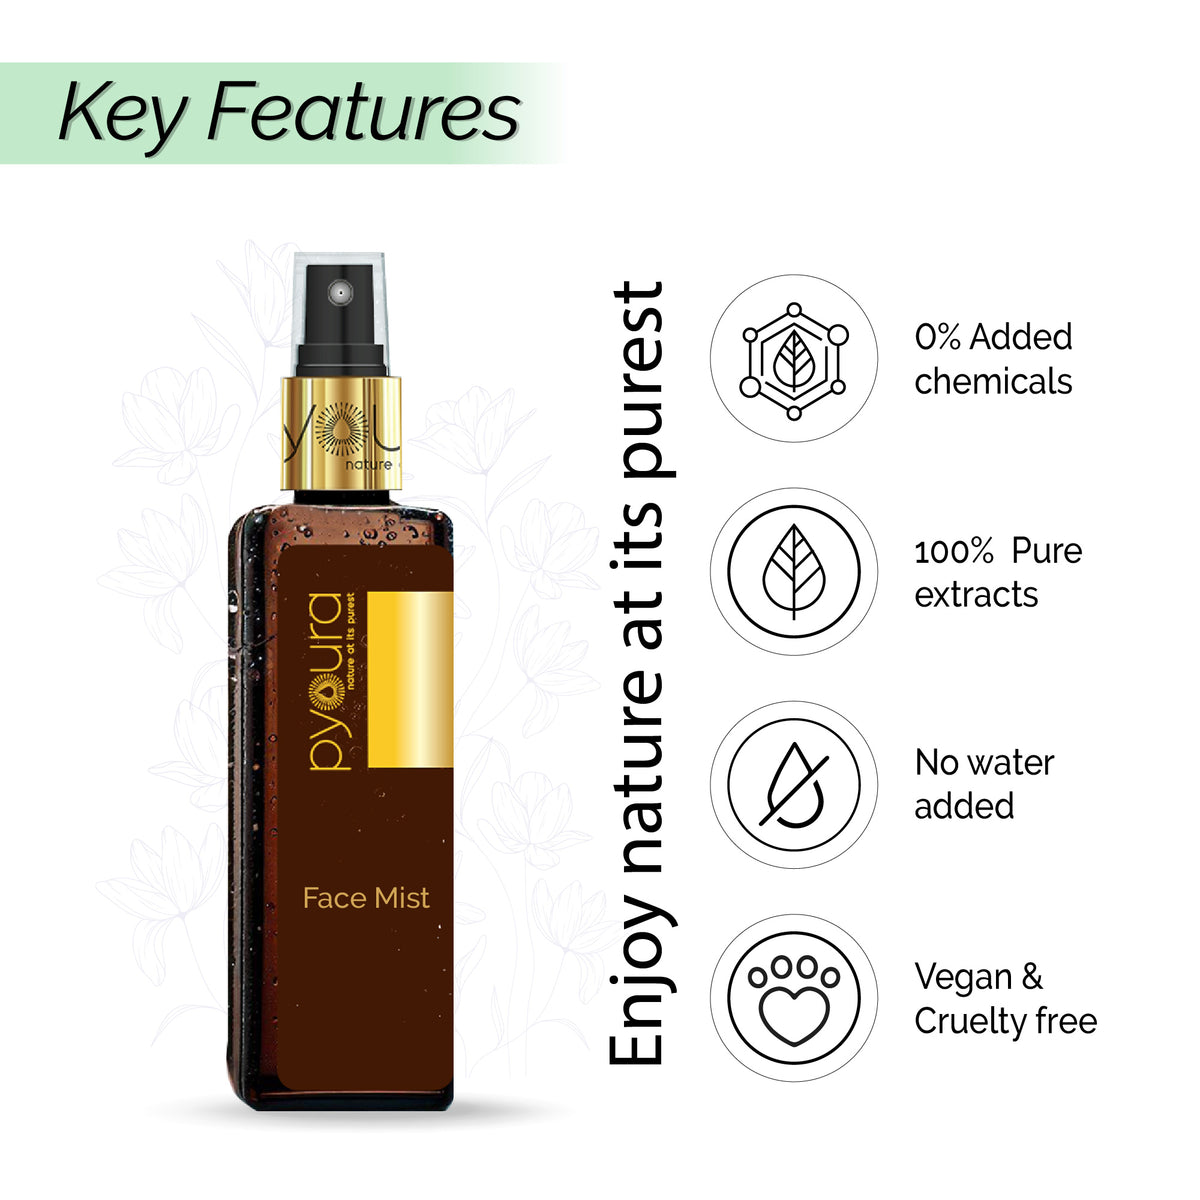 Neem & Rose Face Mist Combo <h4> Manage dark spots and get a soothed, hydrated skin with 100% pure extracts <h4> <h6>100 ml each Pack of 2<h6>